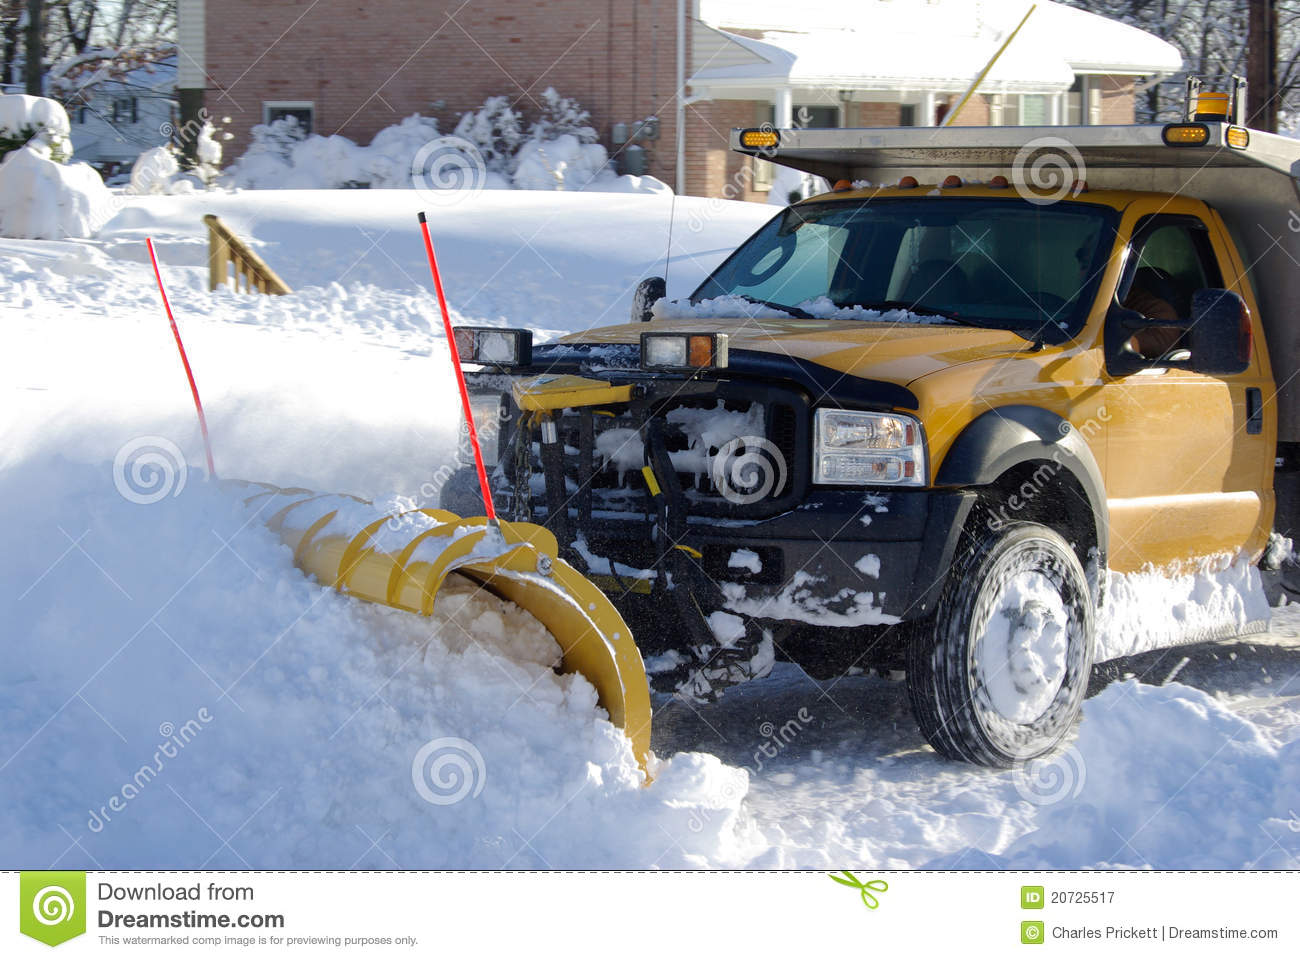 Local Snow Plow Clearing The Road After A Heavy Snow Storm